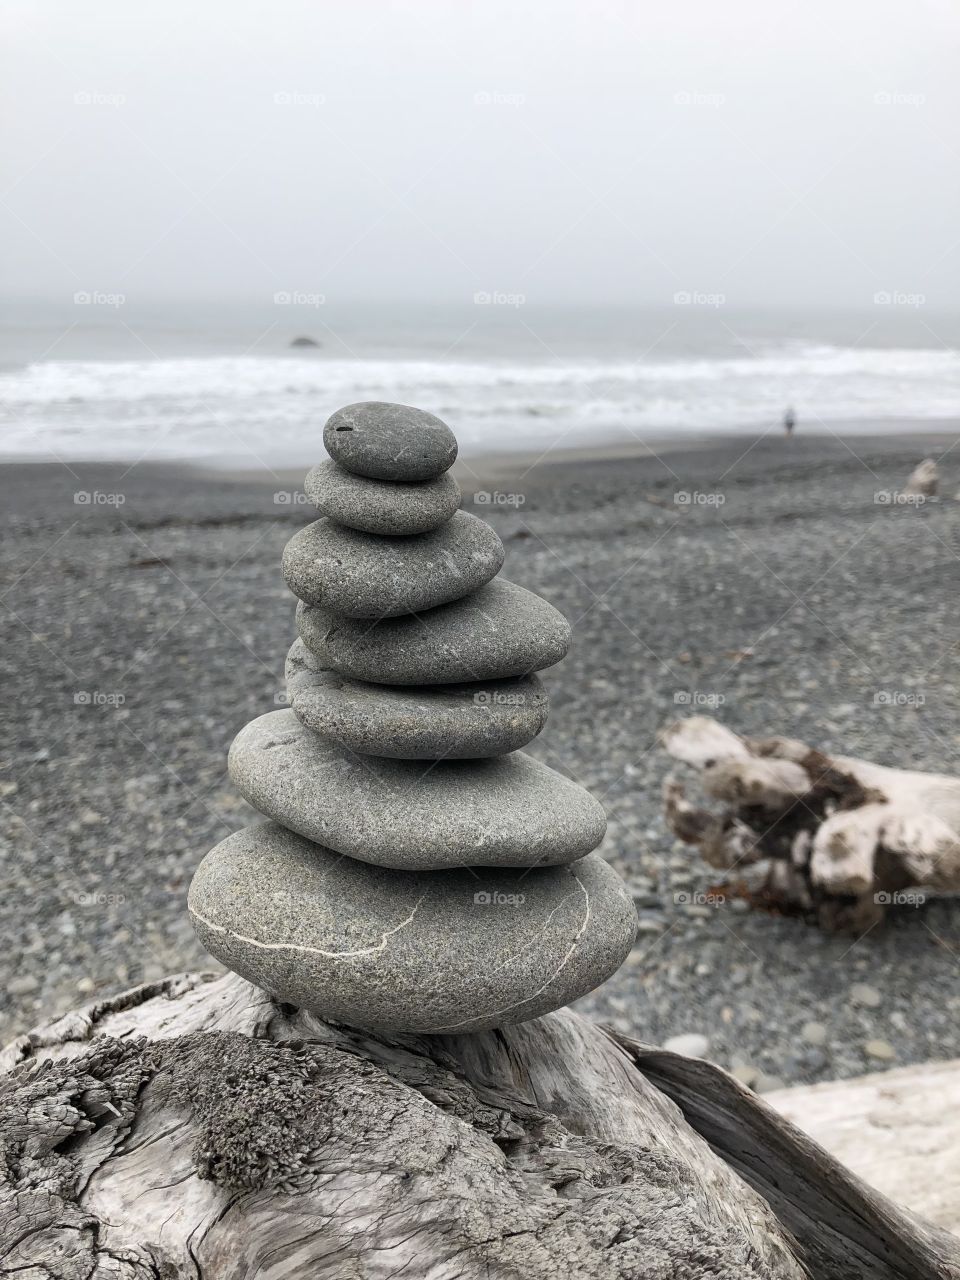 Rocks stacked by the ocean with sea wood in background / zen / peace